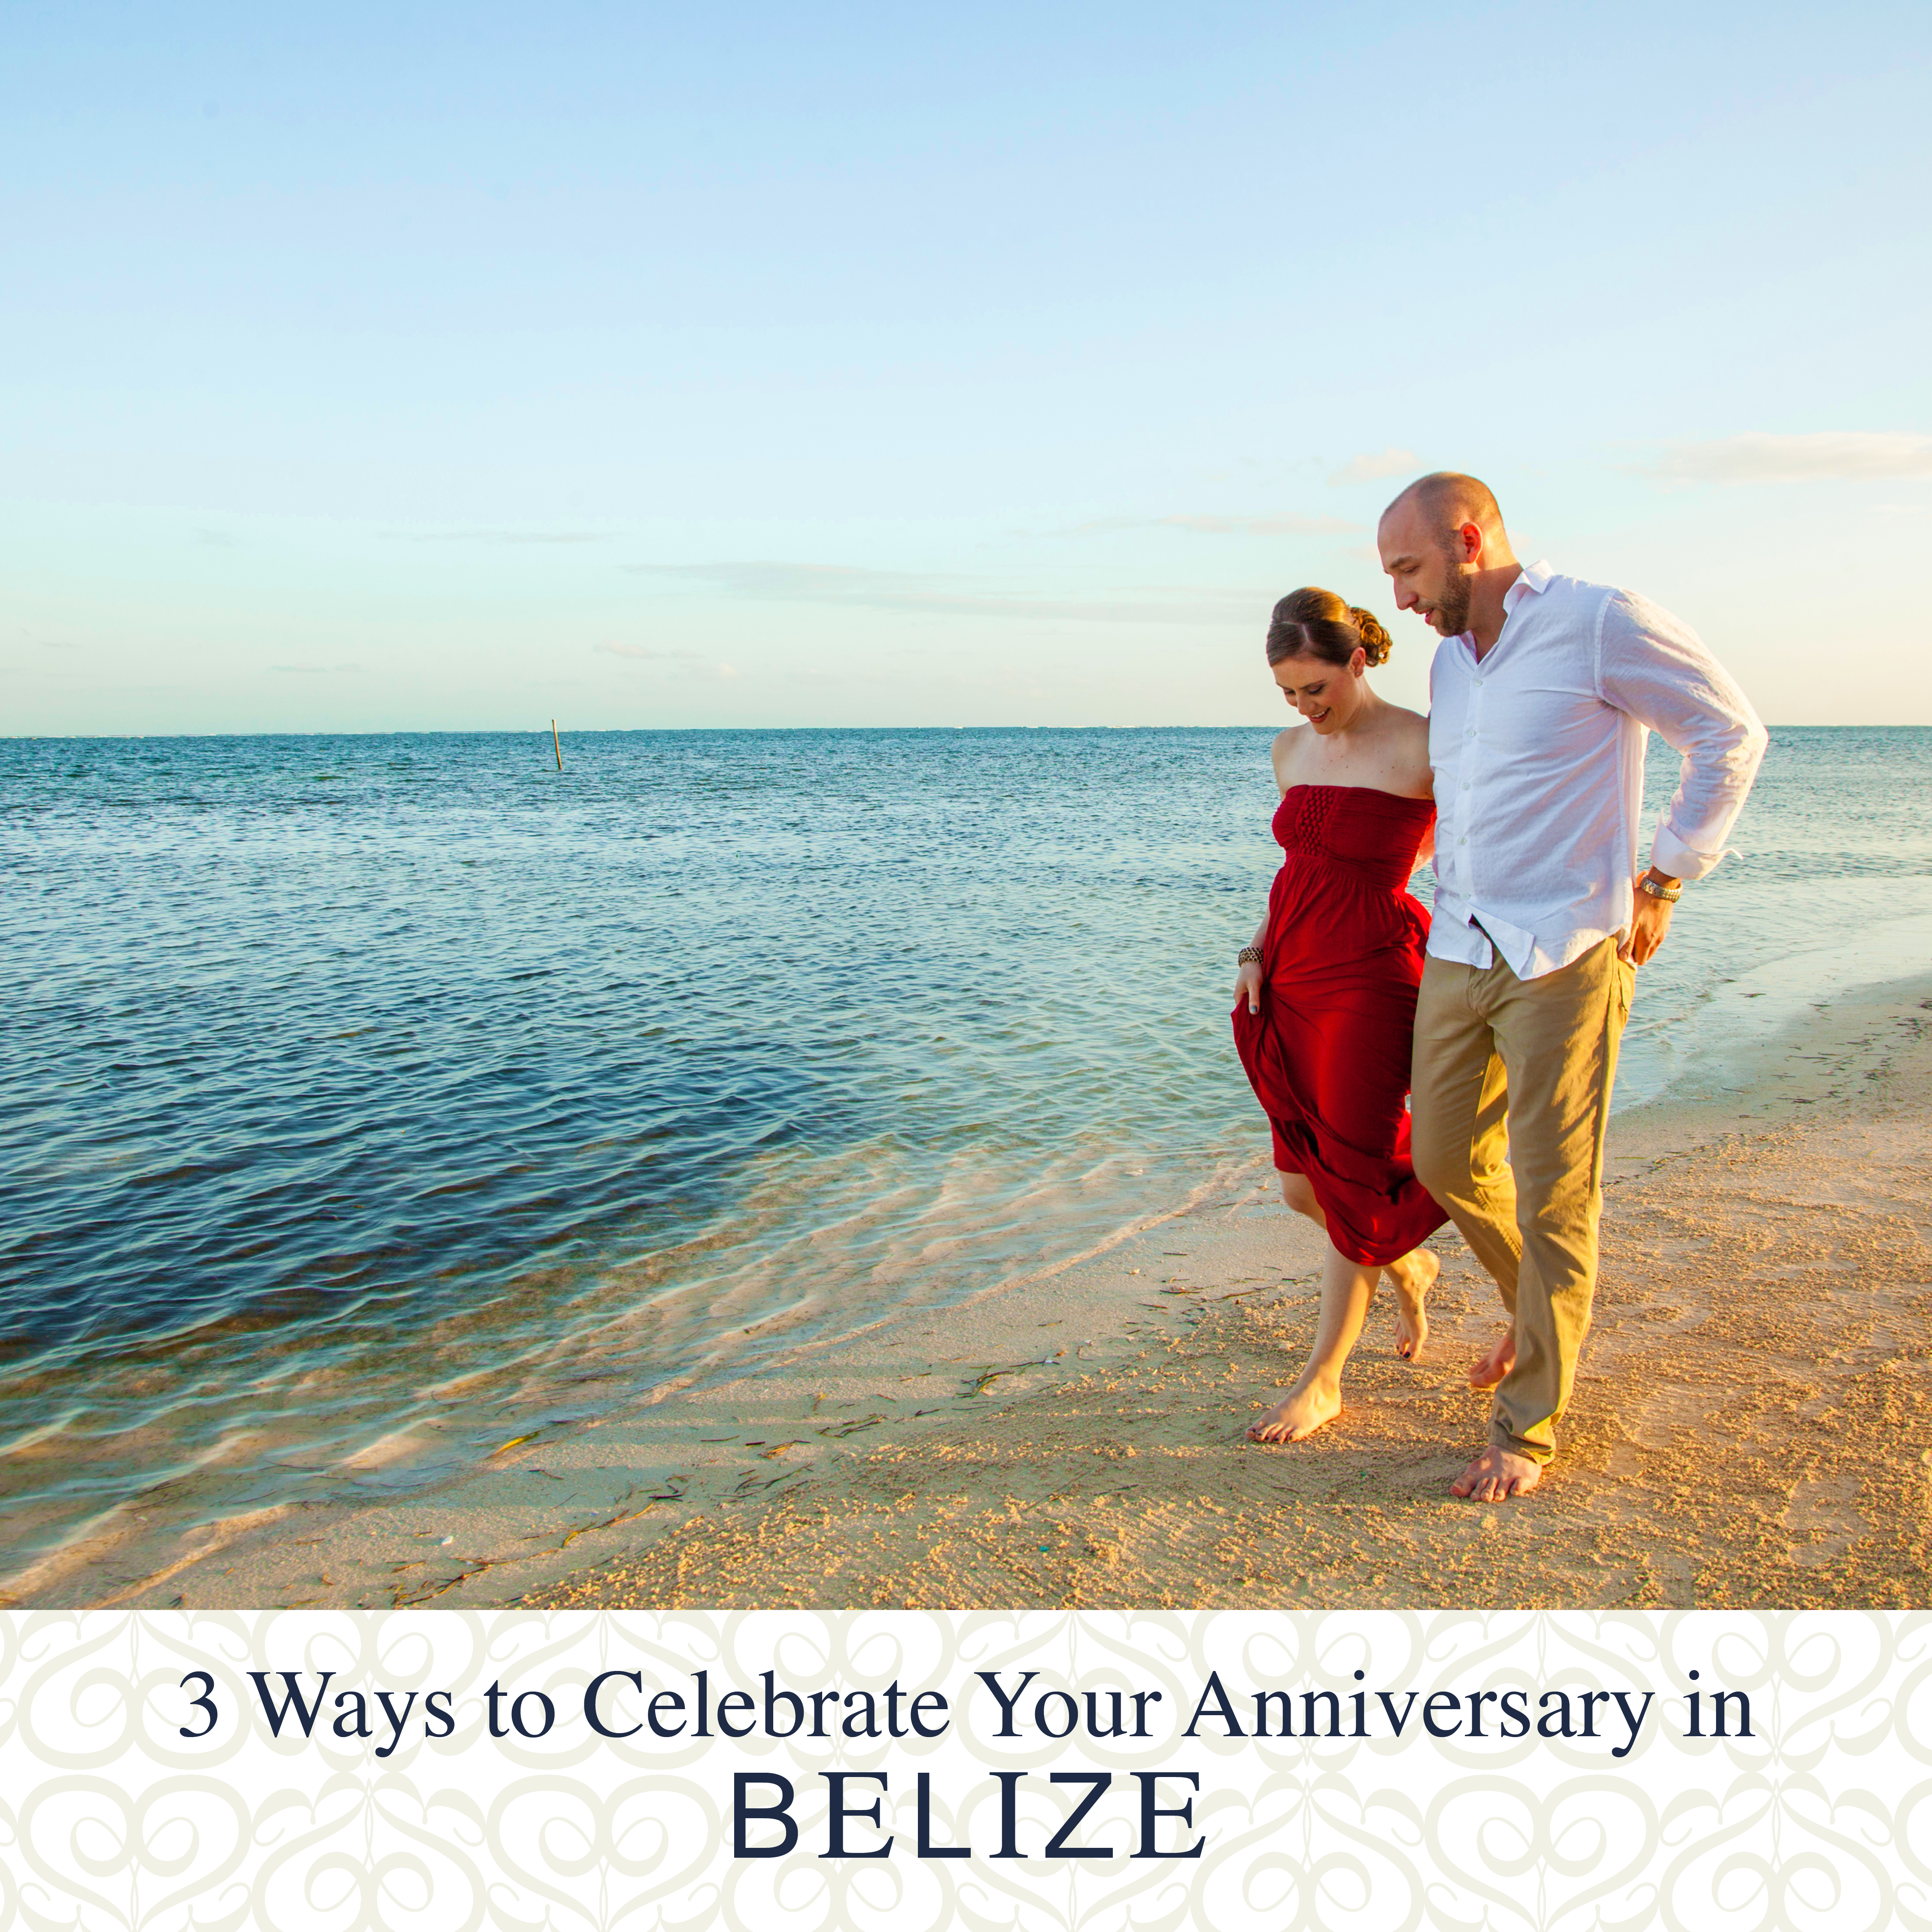 celebrate-your-anniversary-in-belize-banner